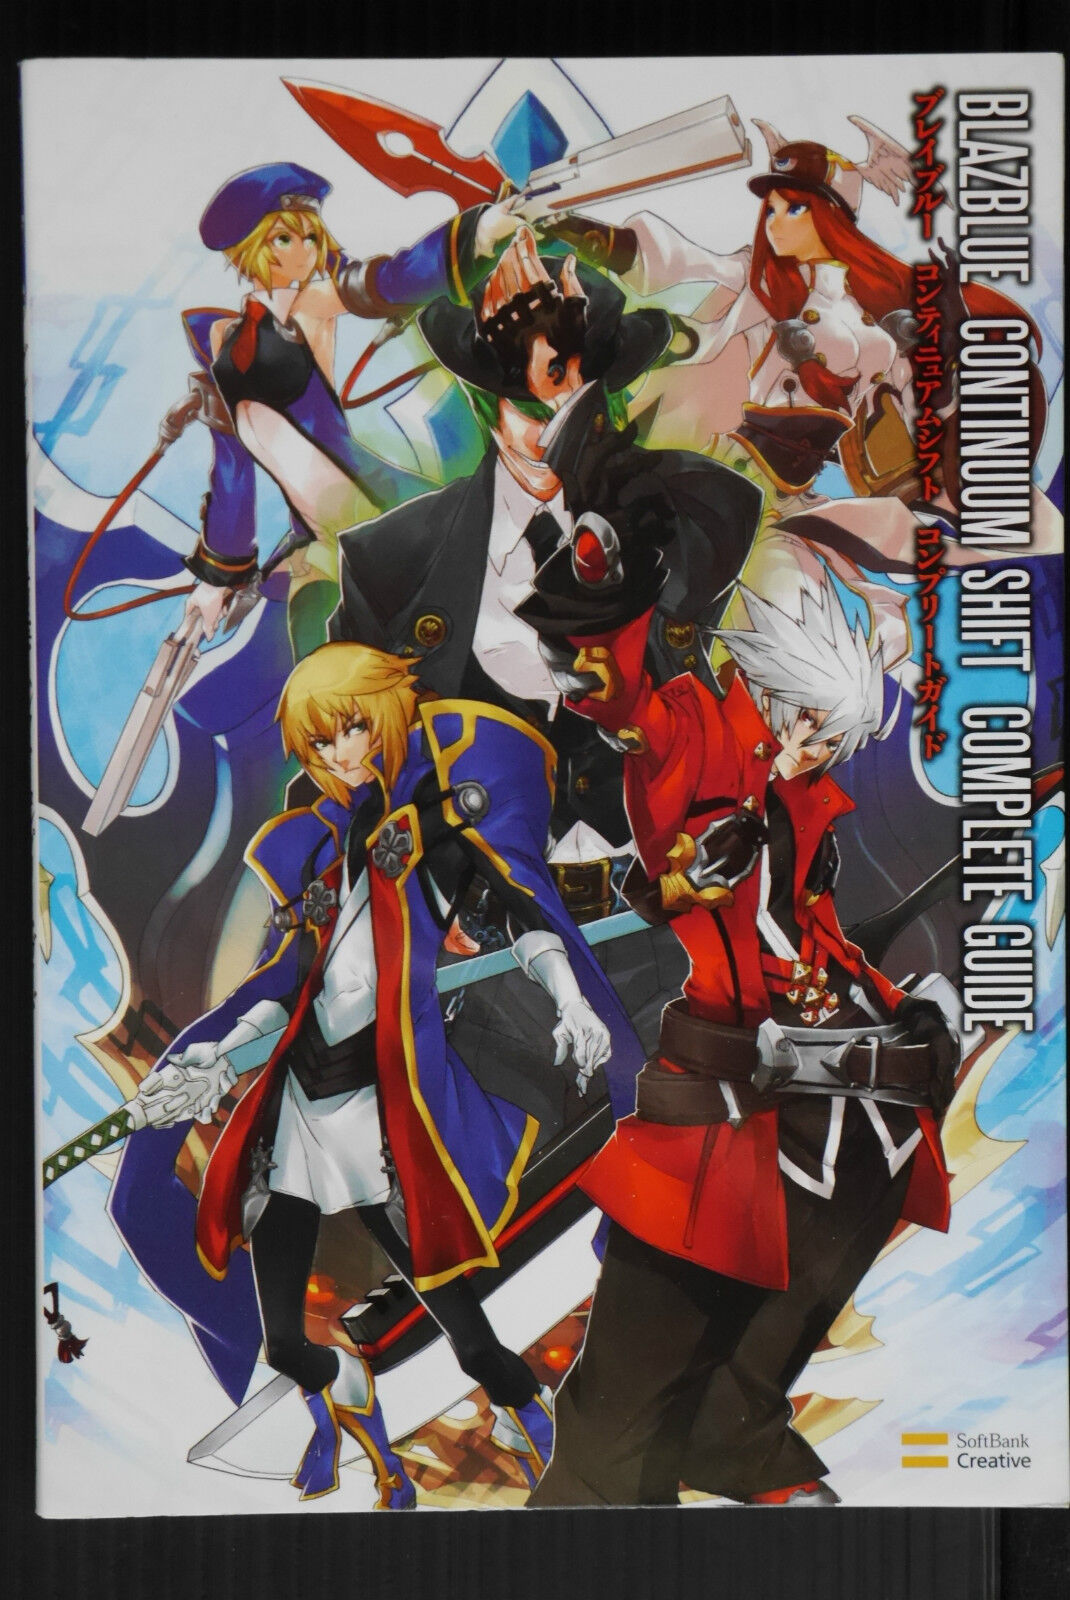 BlazBlue Continuum Shift - Complete Guide Book - Japan